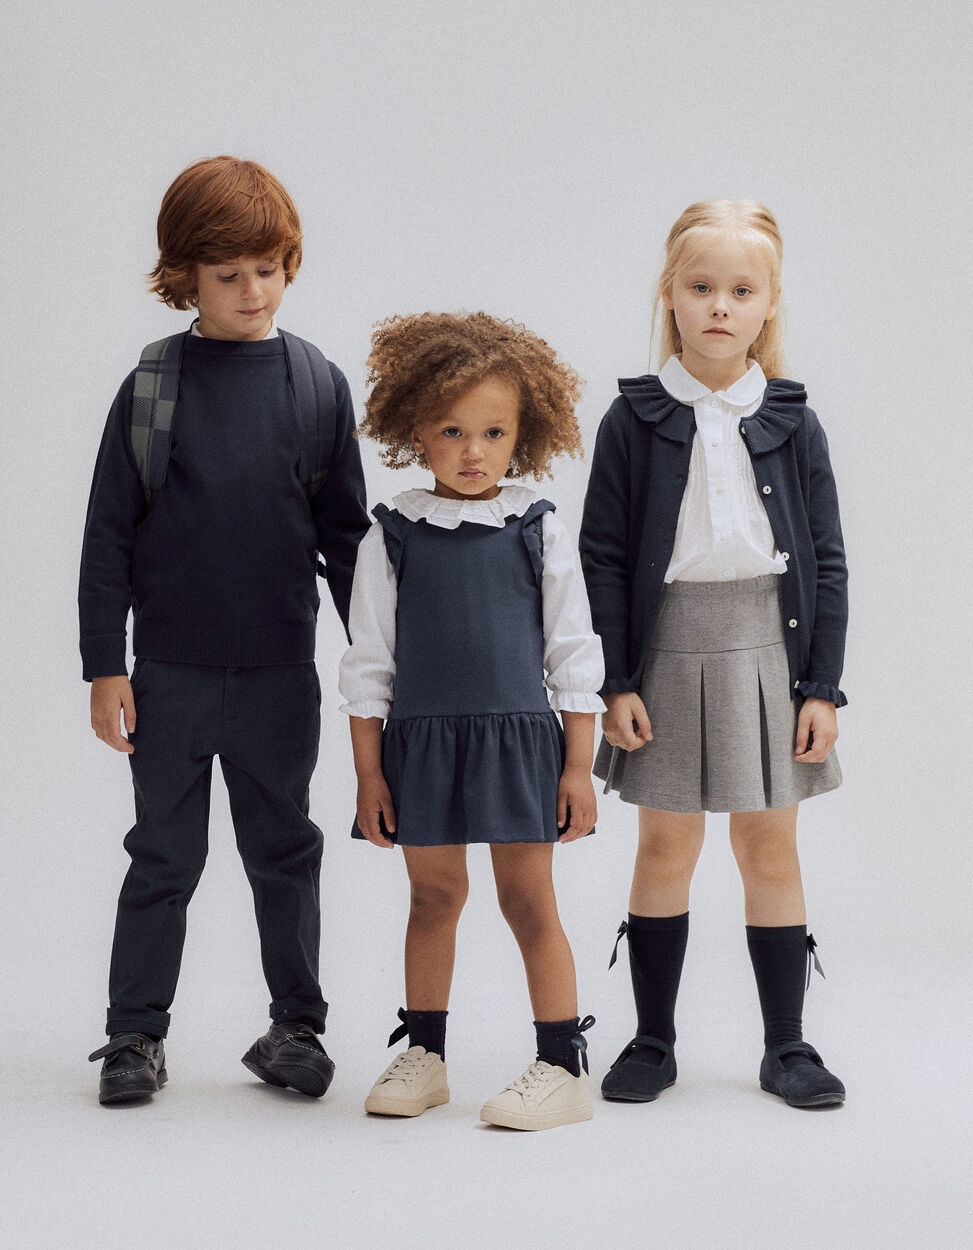 Set of Uniforms for Babies and Children - Back to School